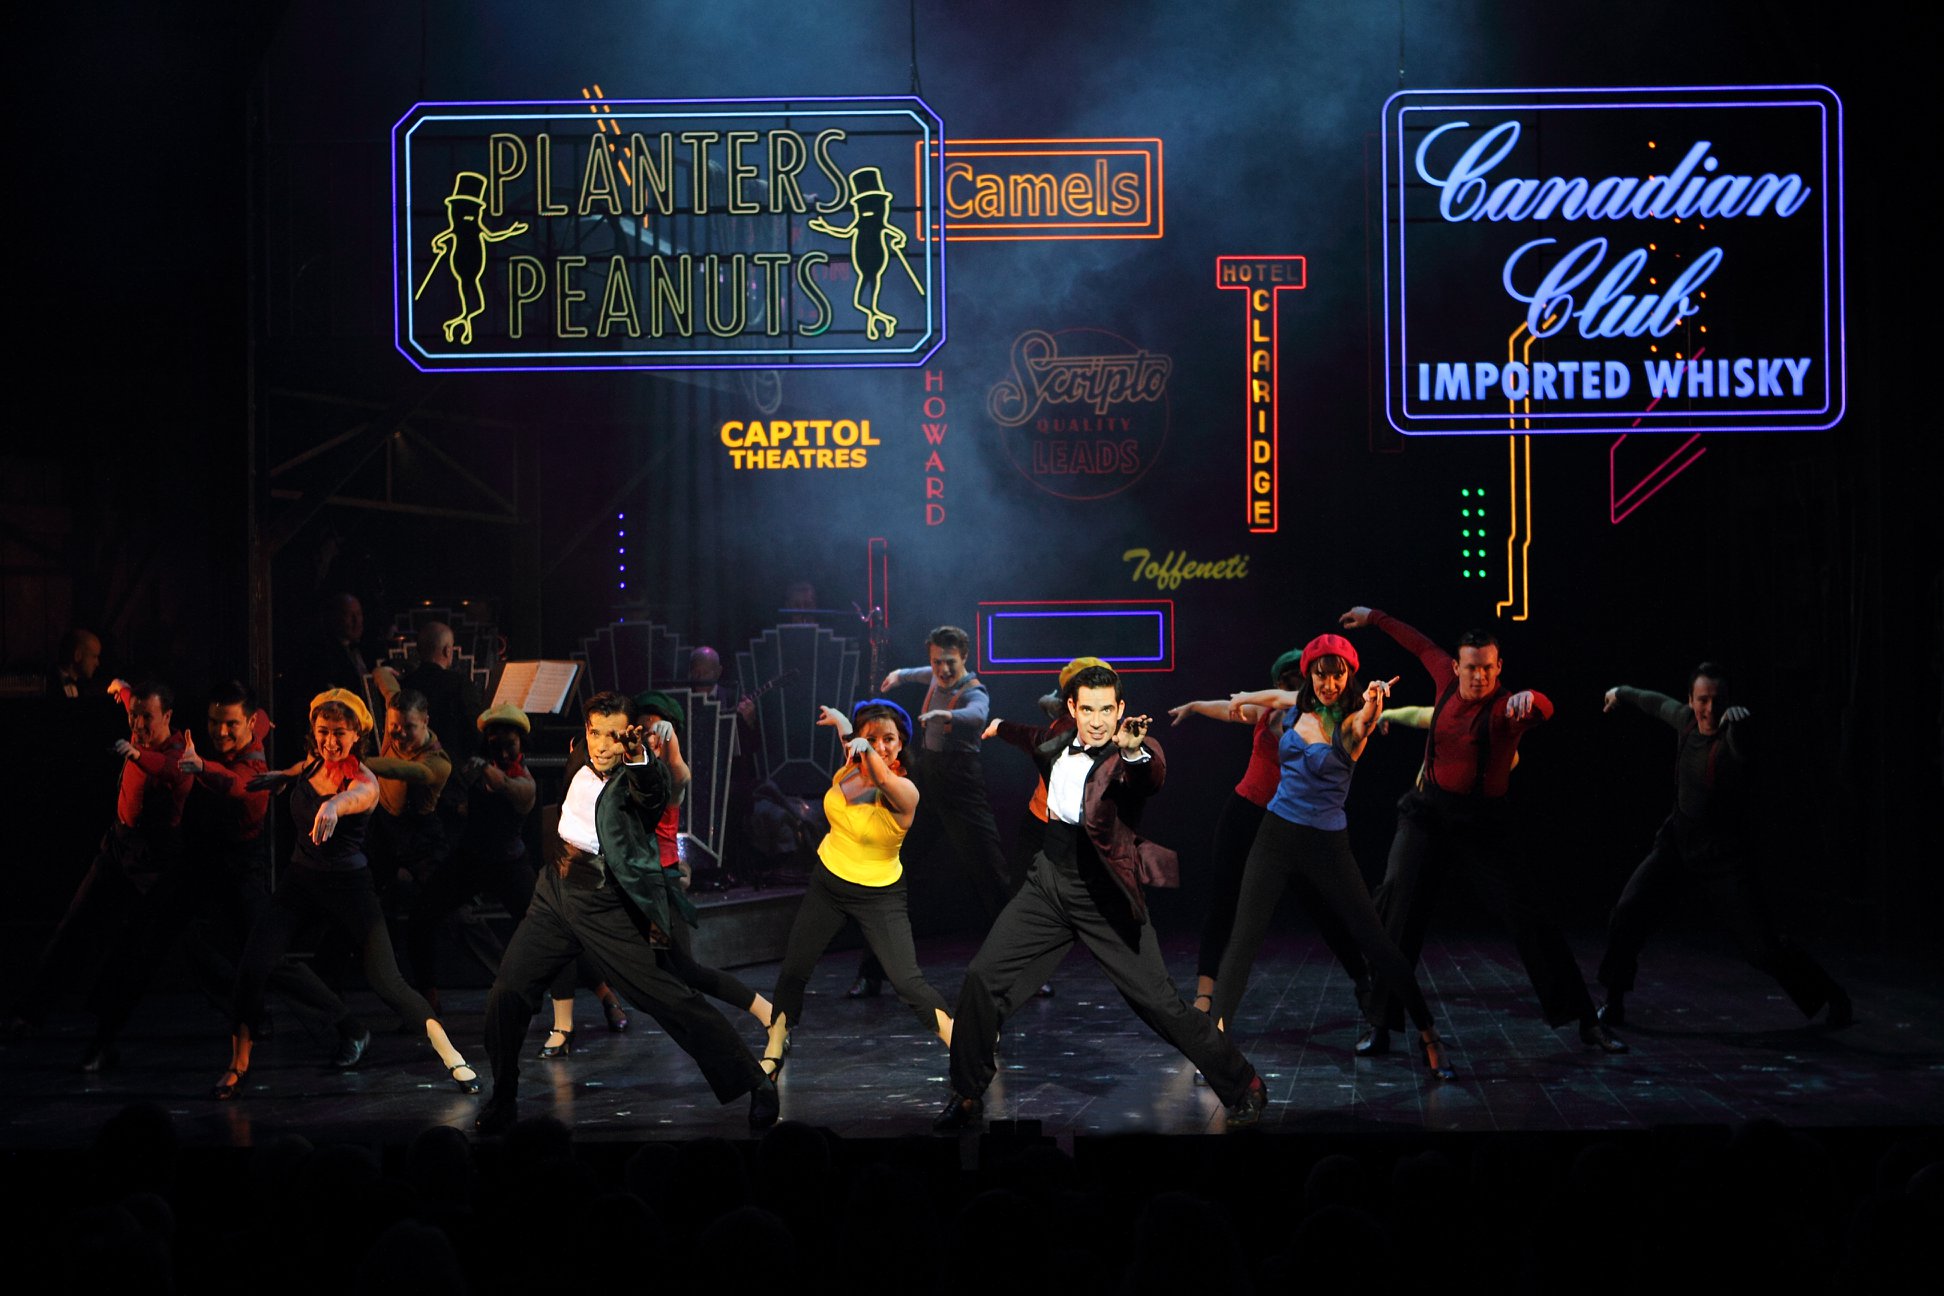 Production image from White Christmas. Danny Mac as Bob and Dan Burton as Phil lead the company in a dance number on stage, which is illuminated with neon signs. The pair are wearing suits.